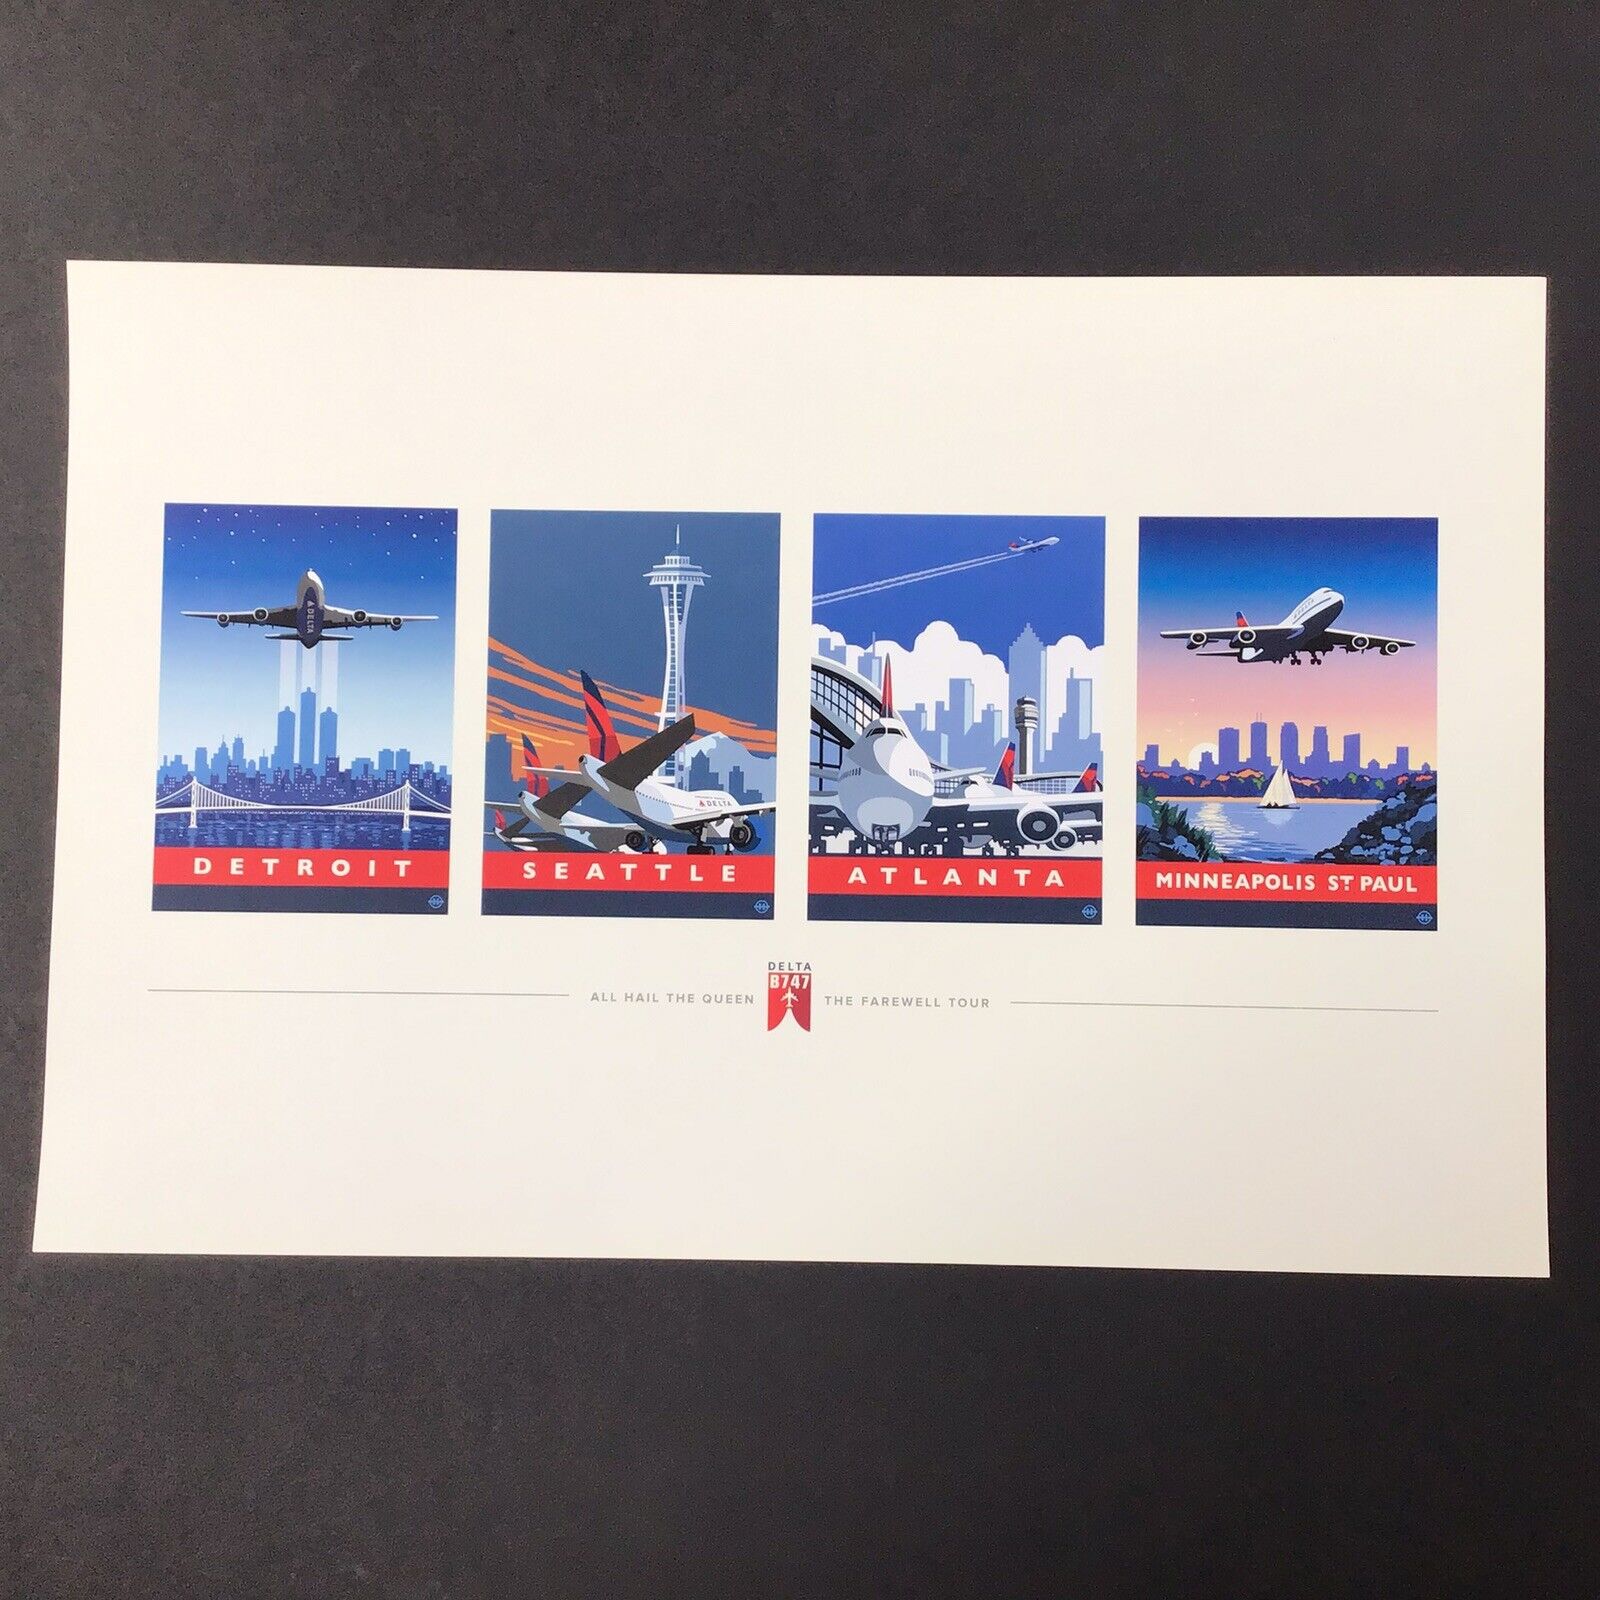 Delta Air Lines Boeing  747 All Hail The Queen Tour Retirement Art Poster